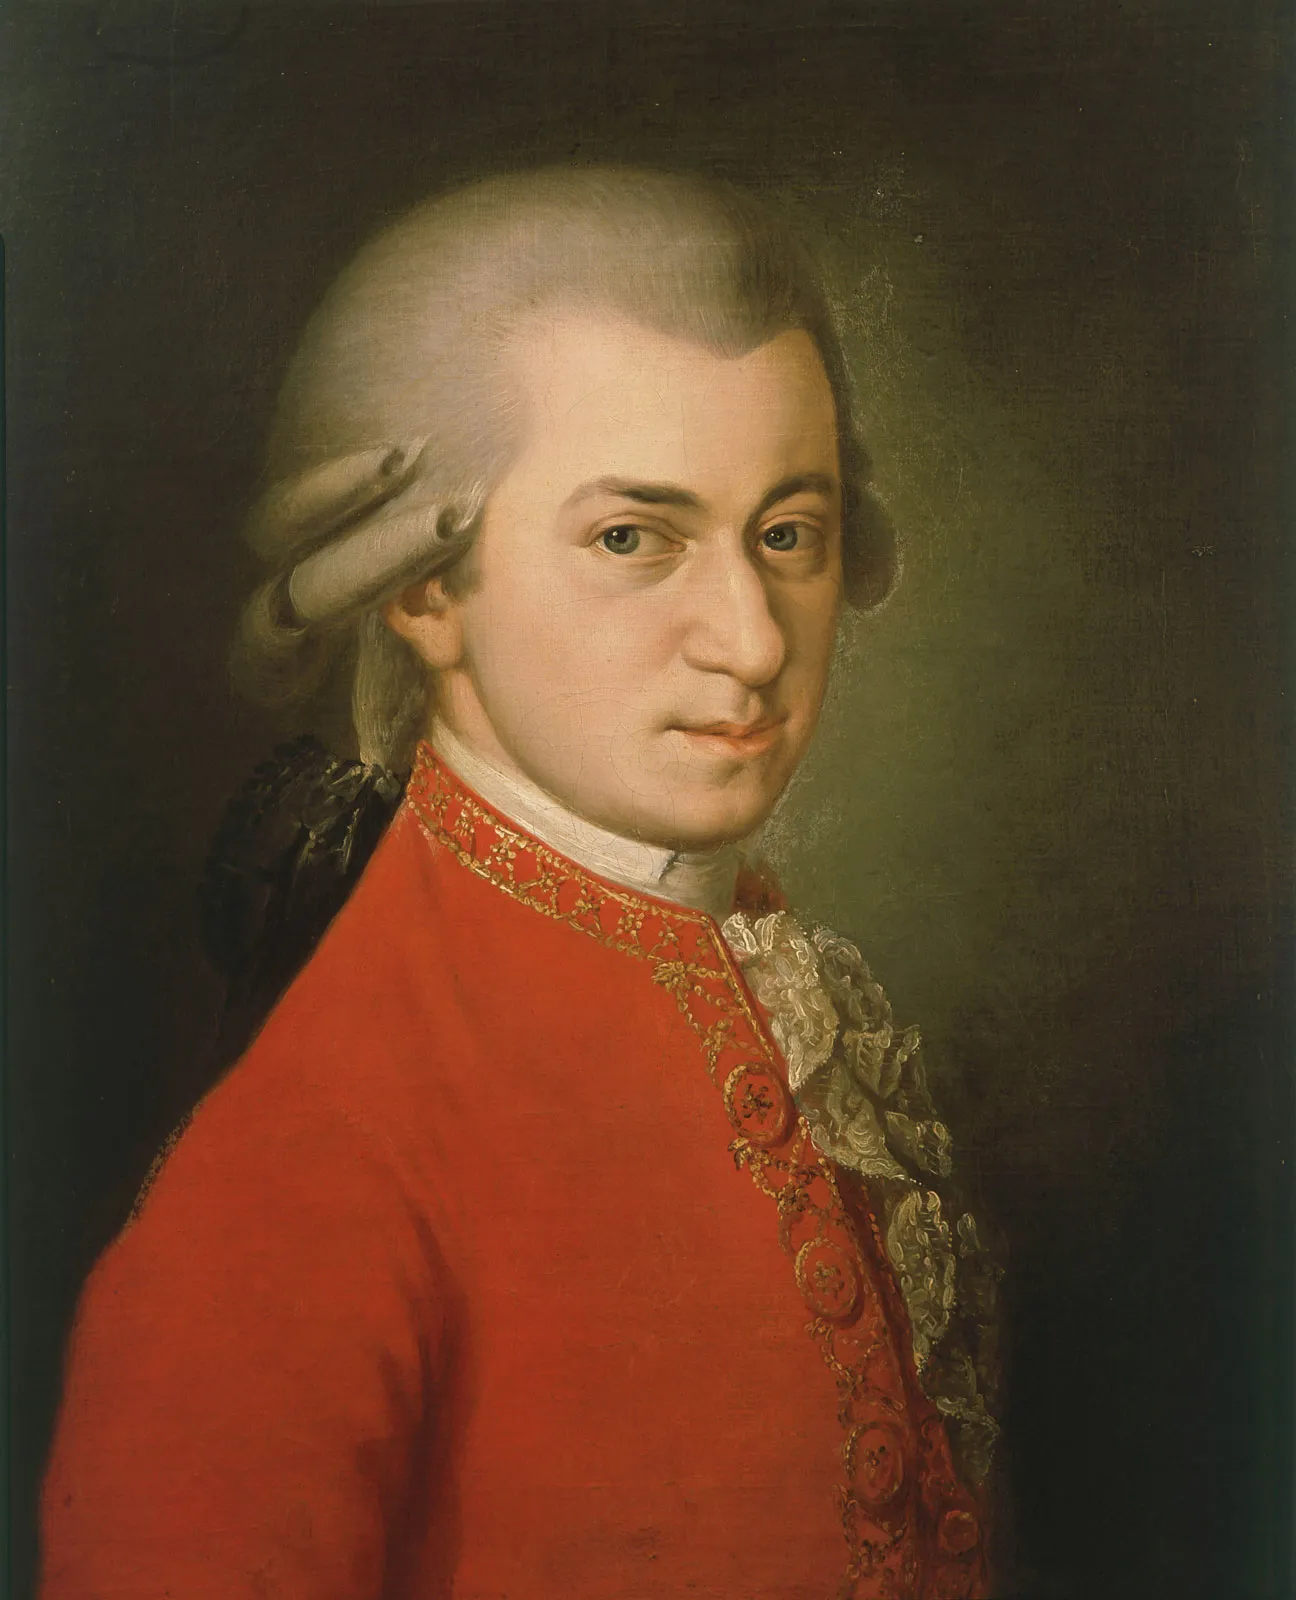 Wolfgang Amadeus Mozart: The Child Prodigy Who Had It All